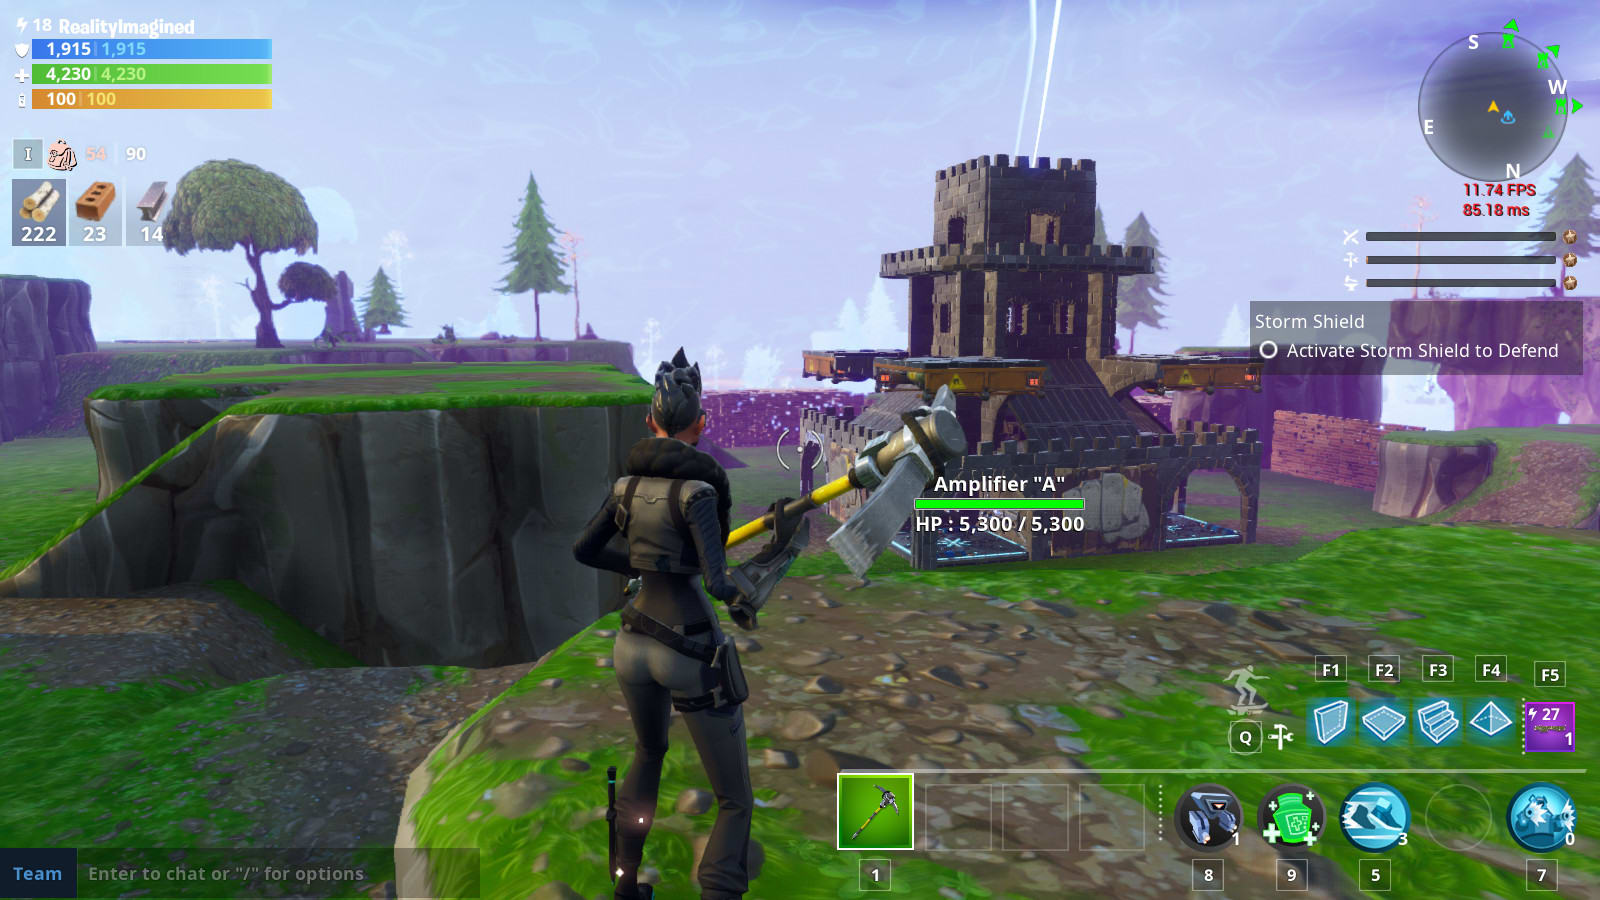 Fortnite Home Bases Help Build Your Storm Sheild Homebase In Fortnite Stw By Imaginaryace Fiverr